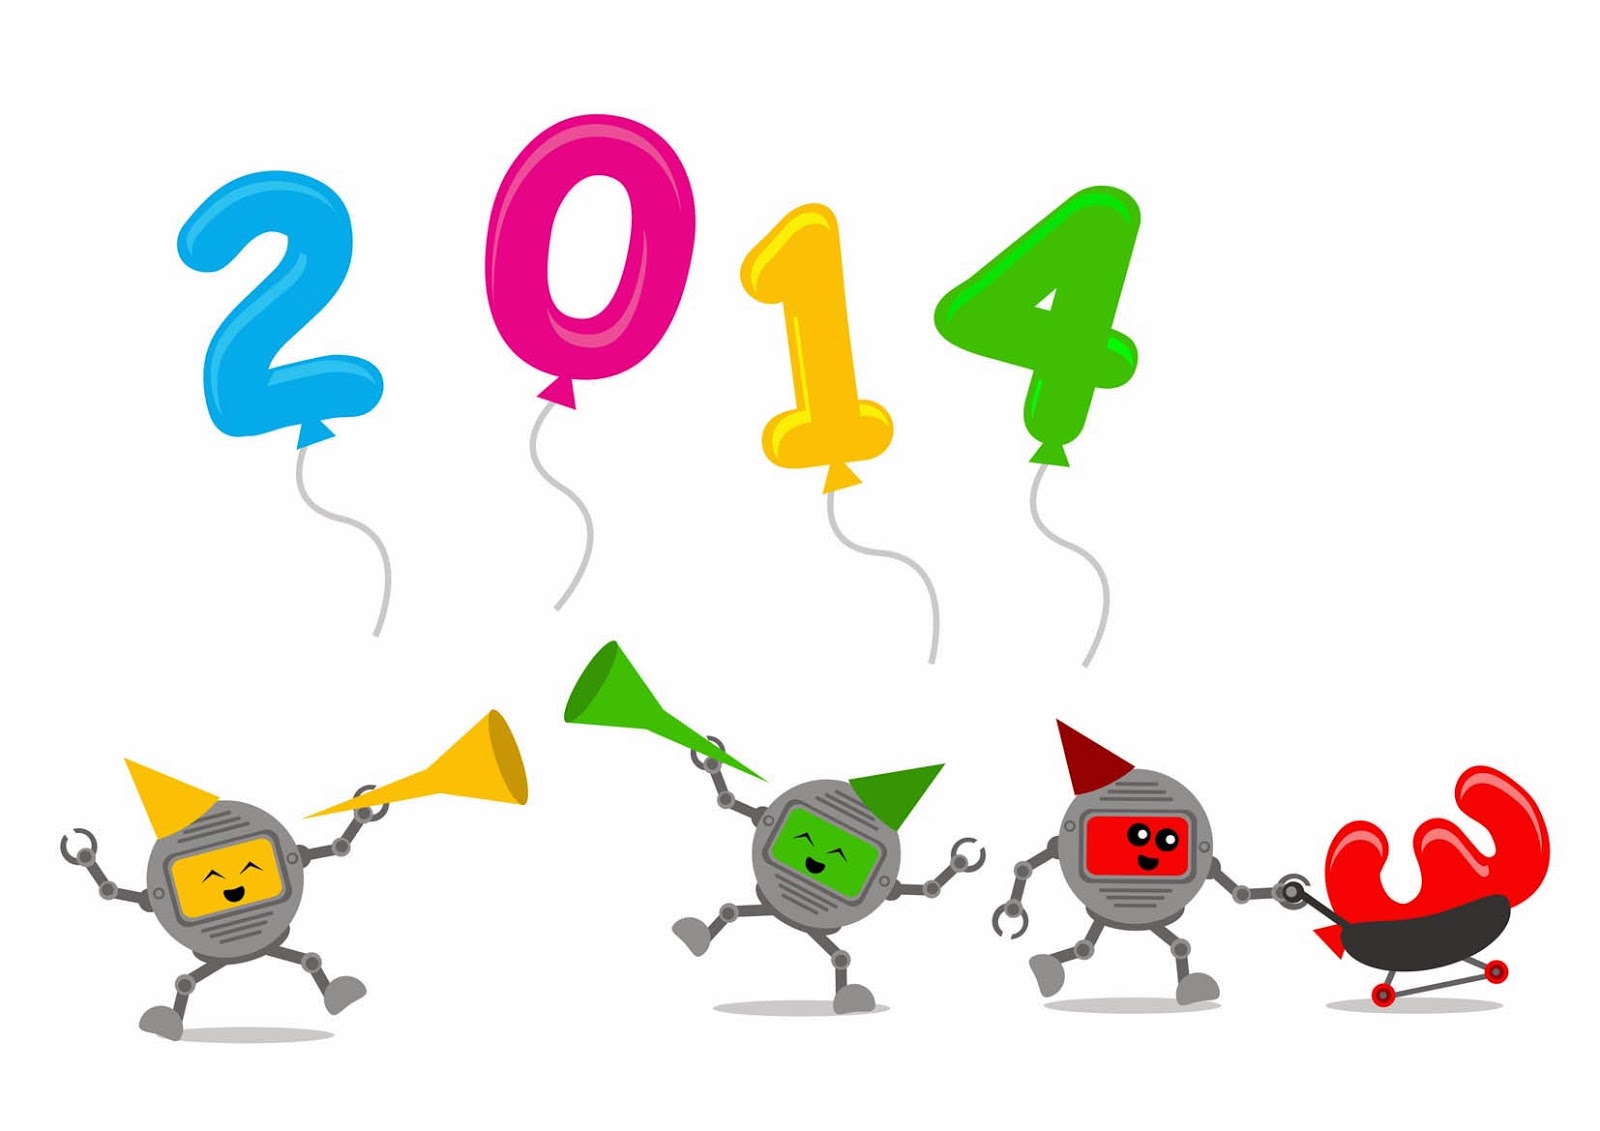 Graphic Design Reference: Free Vector of New Year 2014 Themes ...